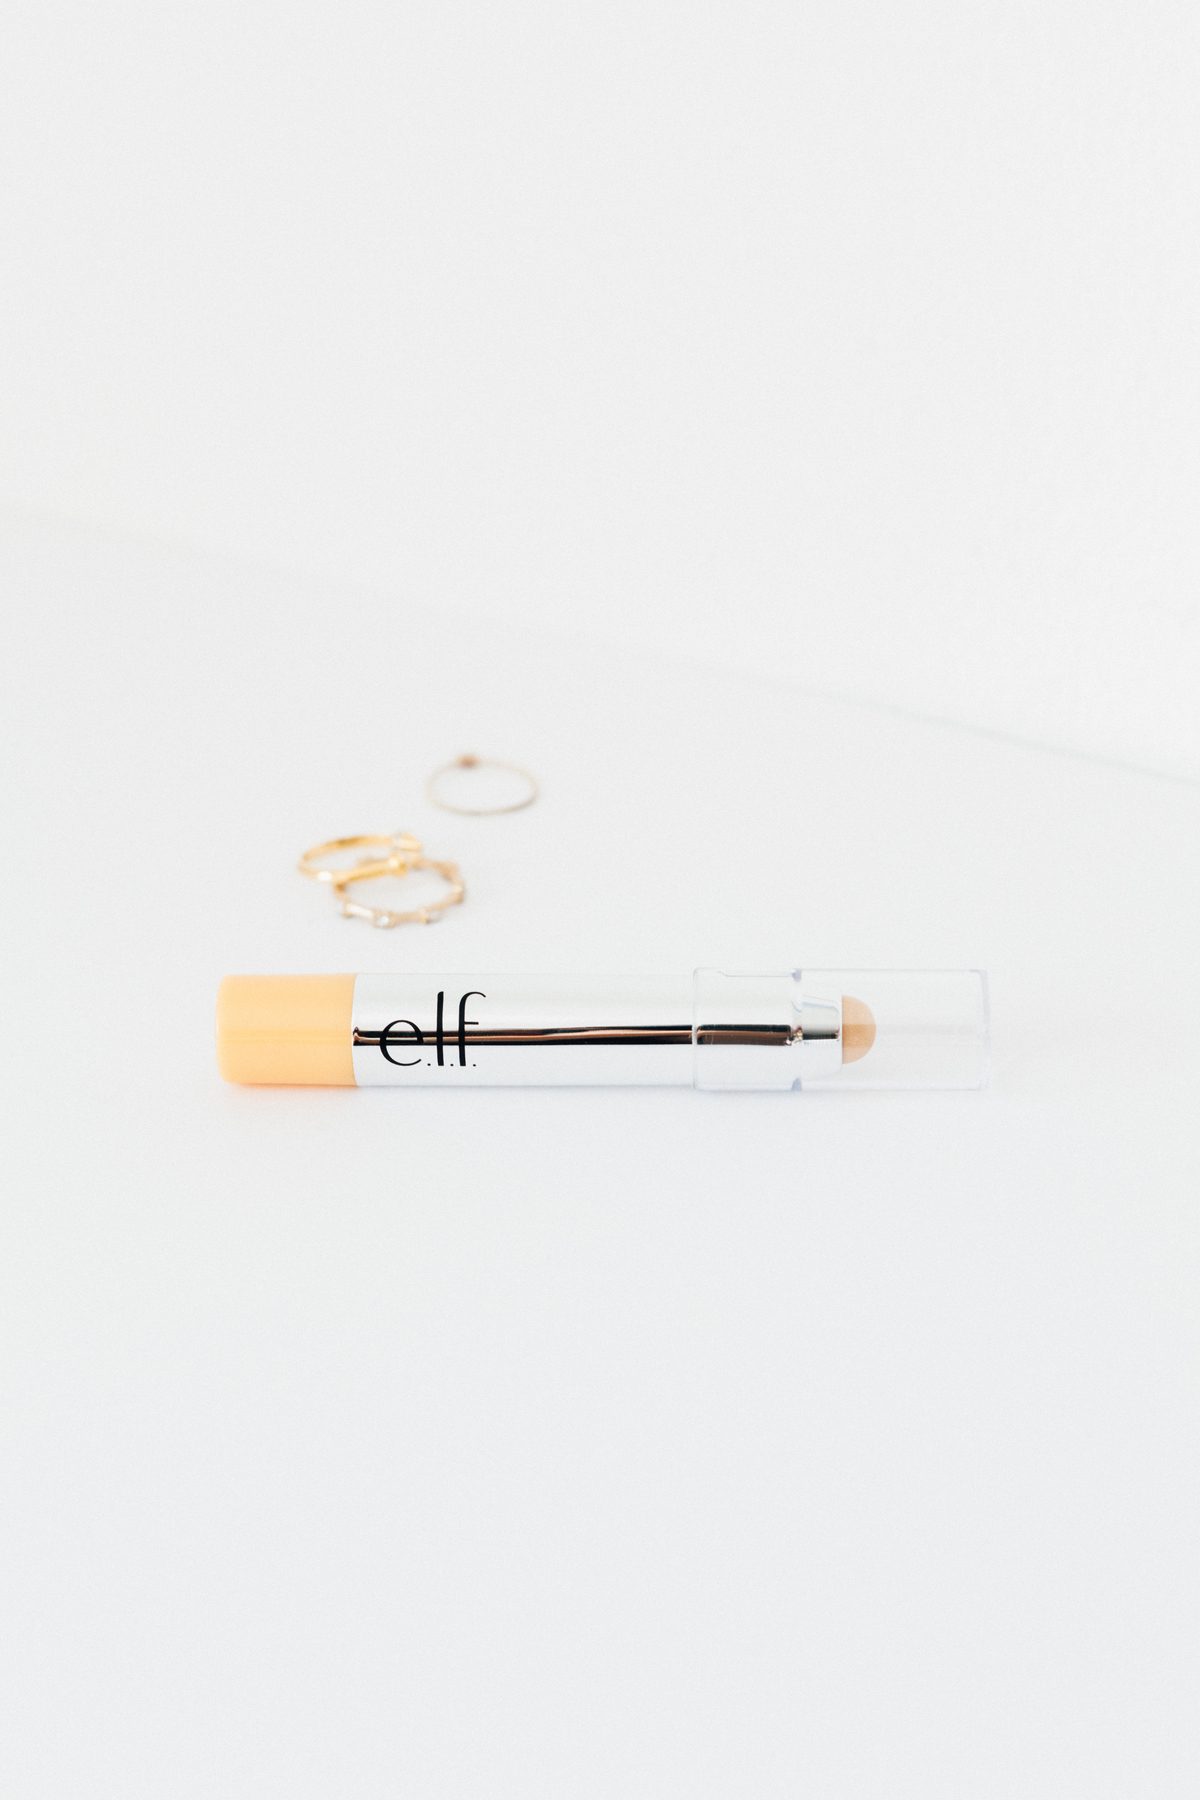 e.l.f. Targeted Natural Glow Stick in Champagne Glow